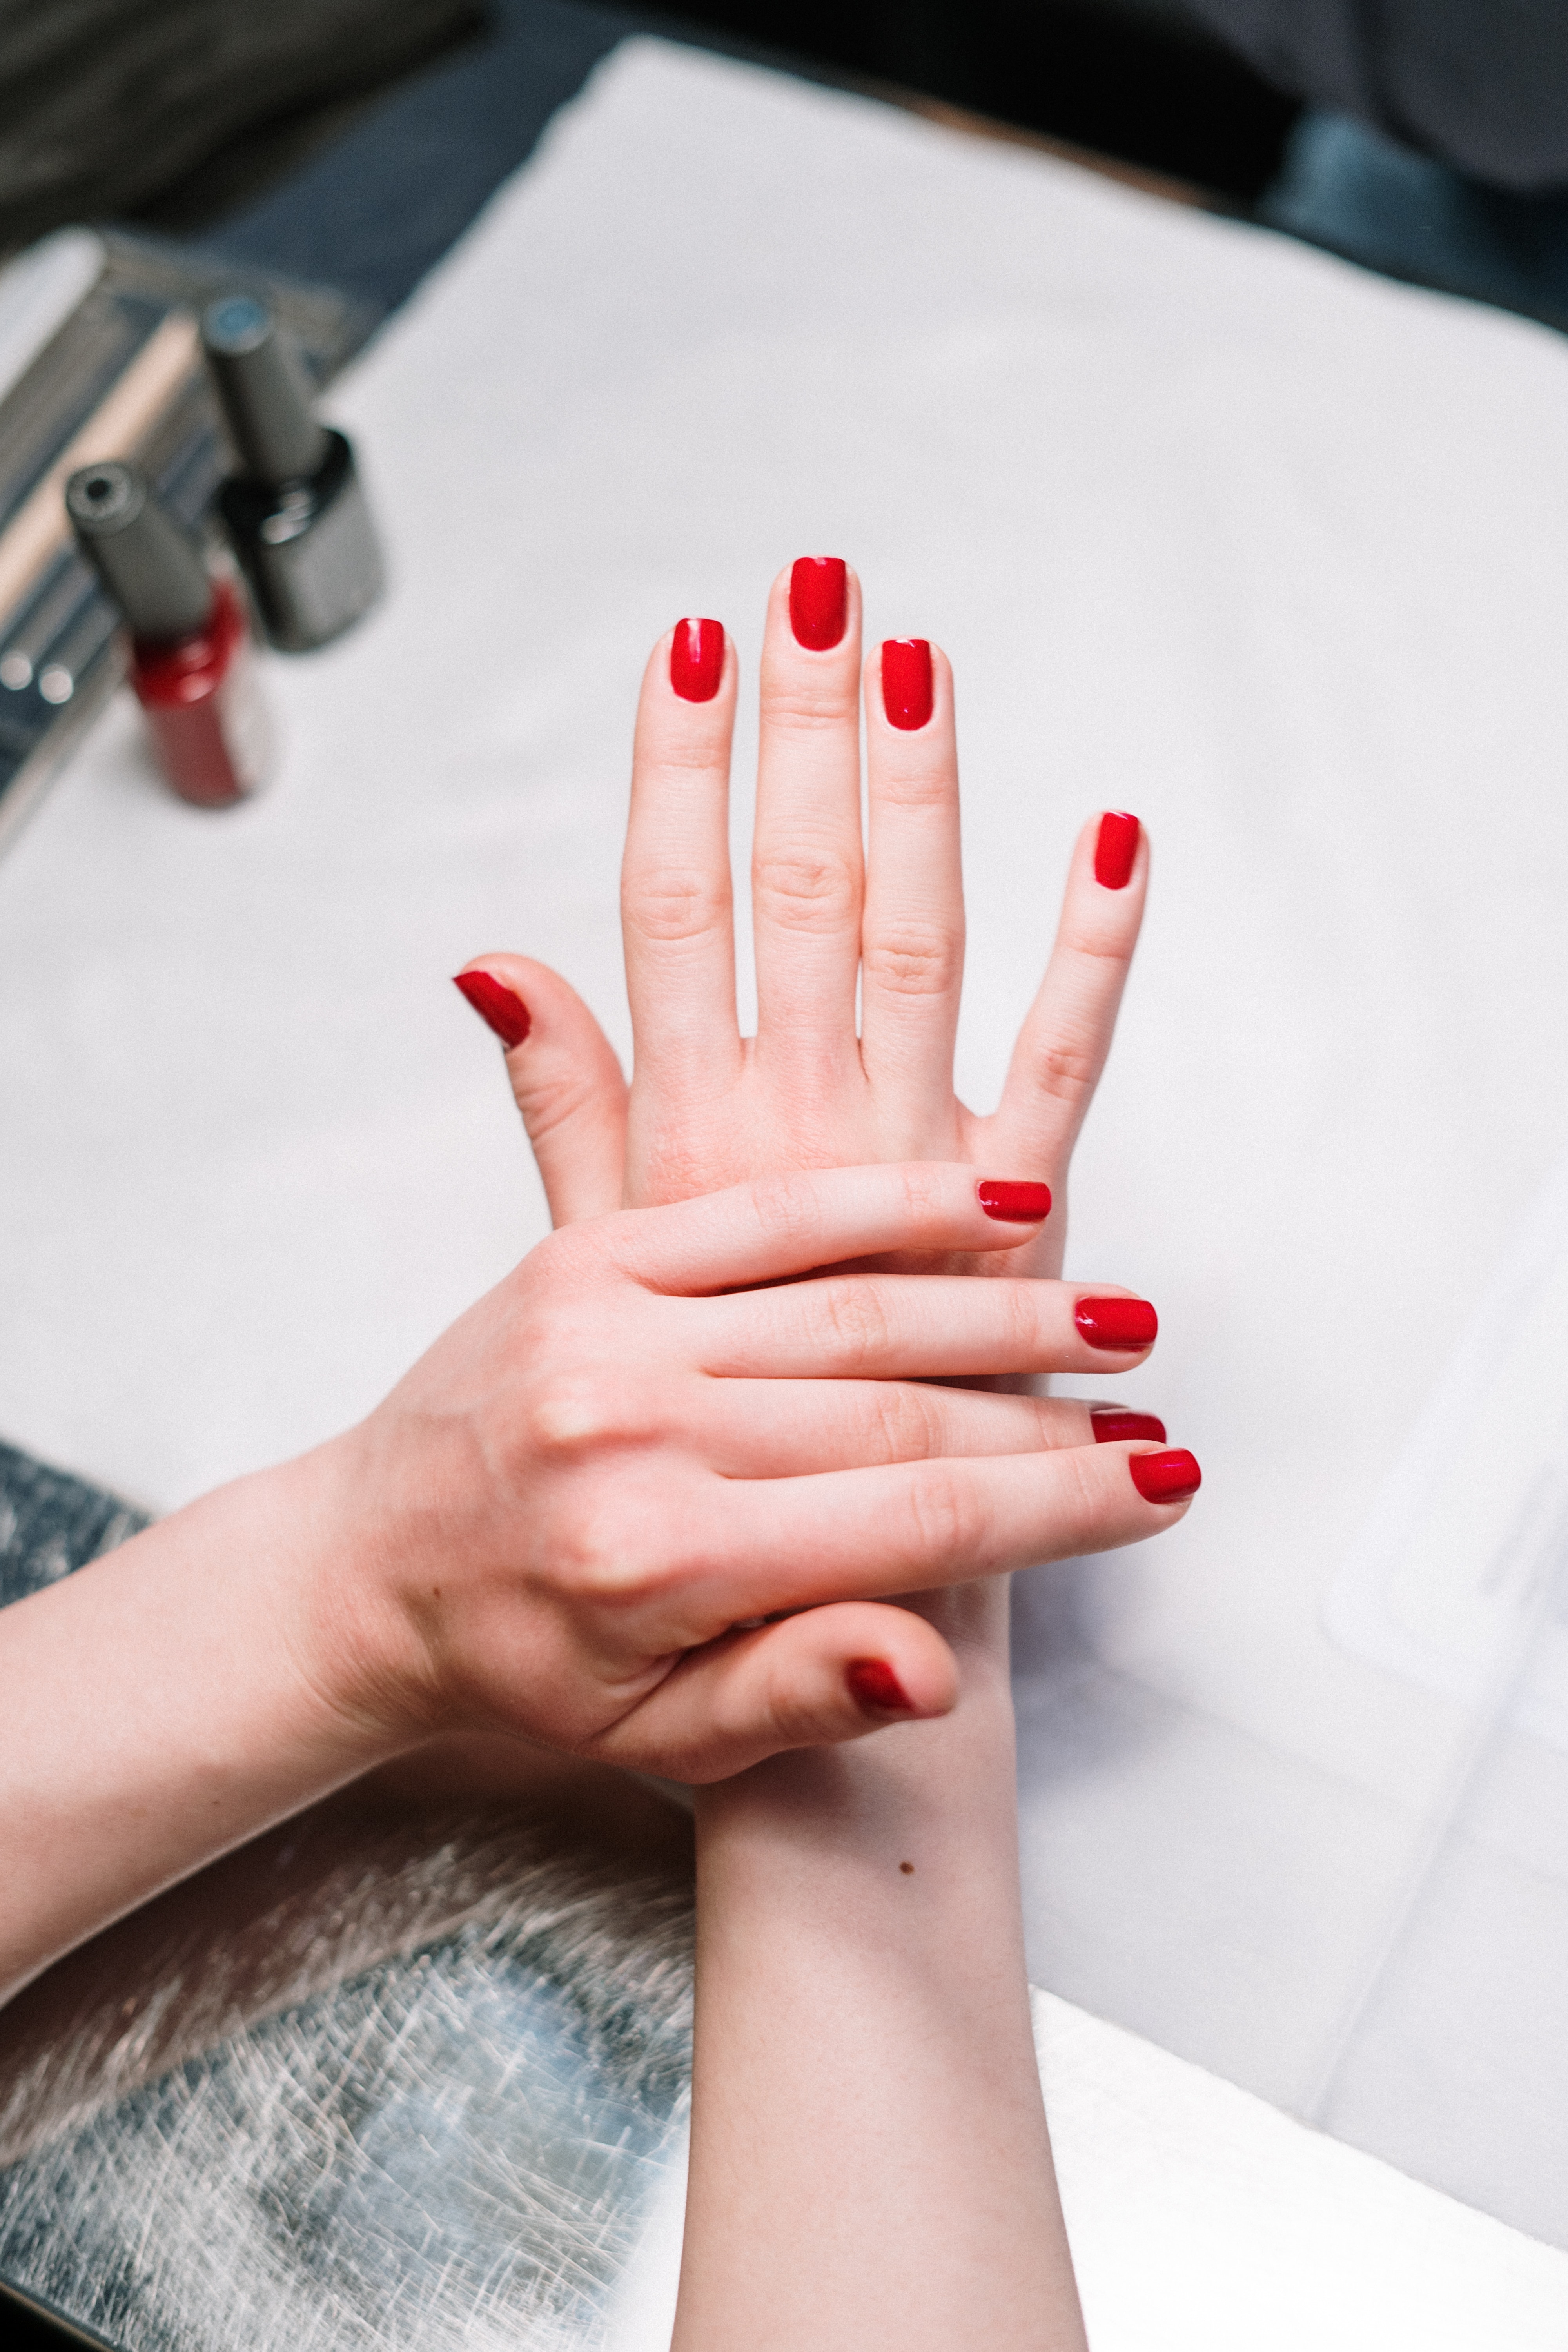 An image of a woman's manicured red nails. | Source: Pexels